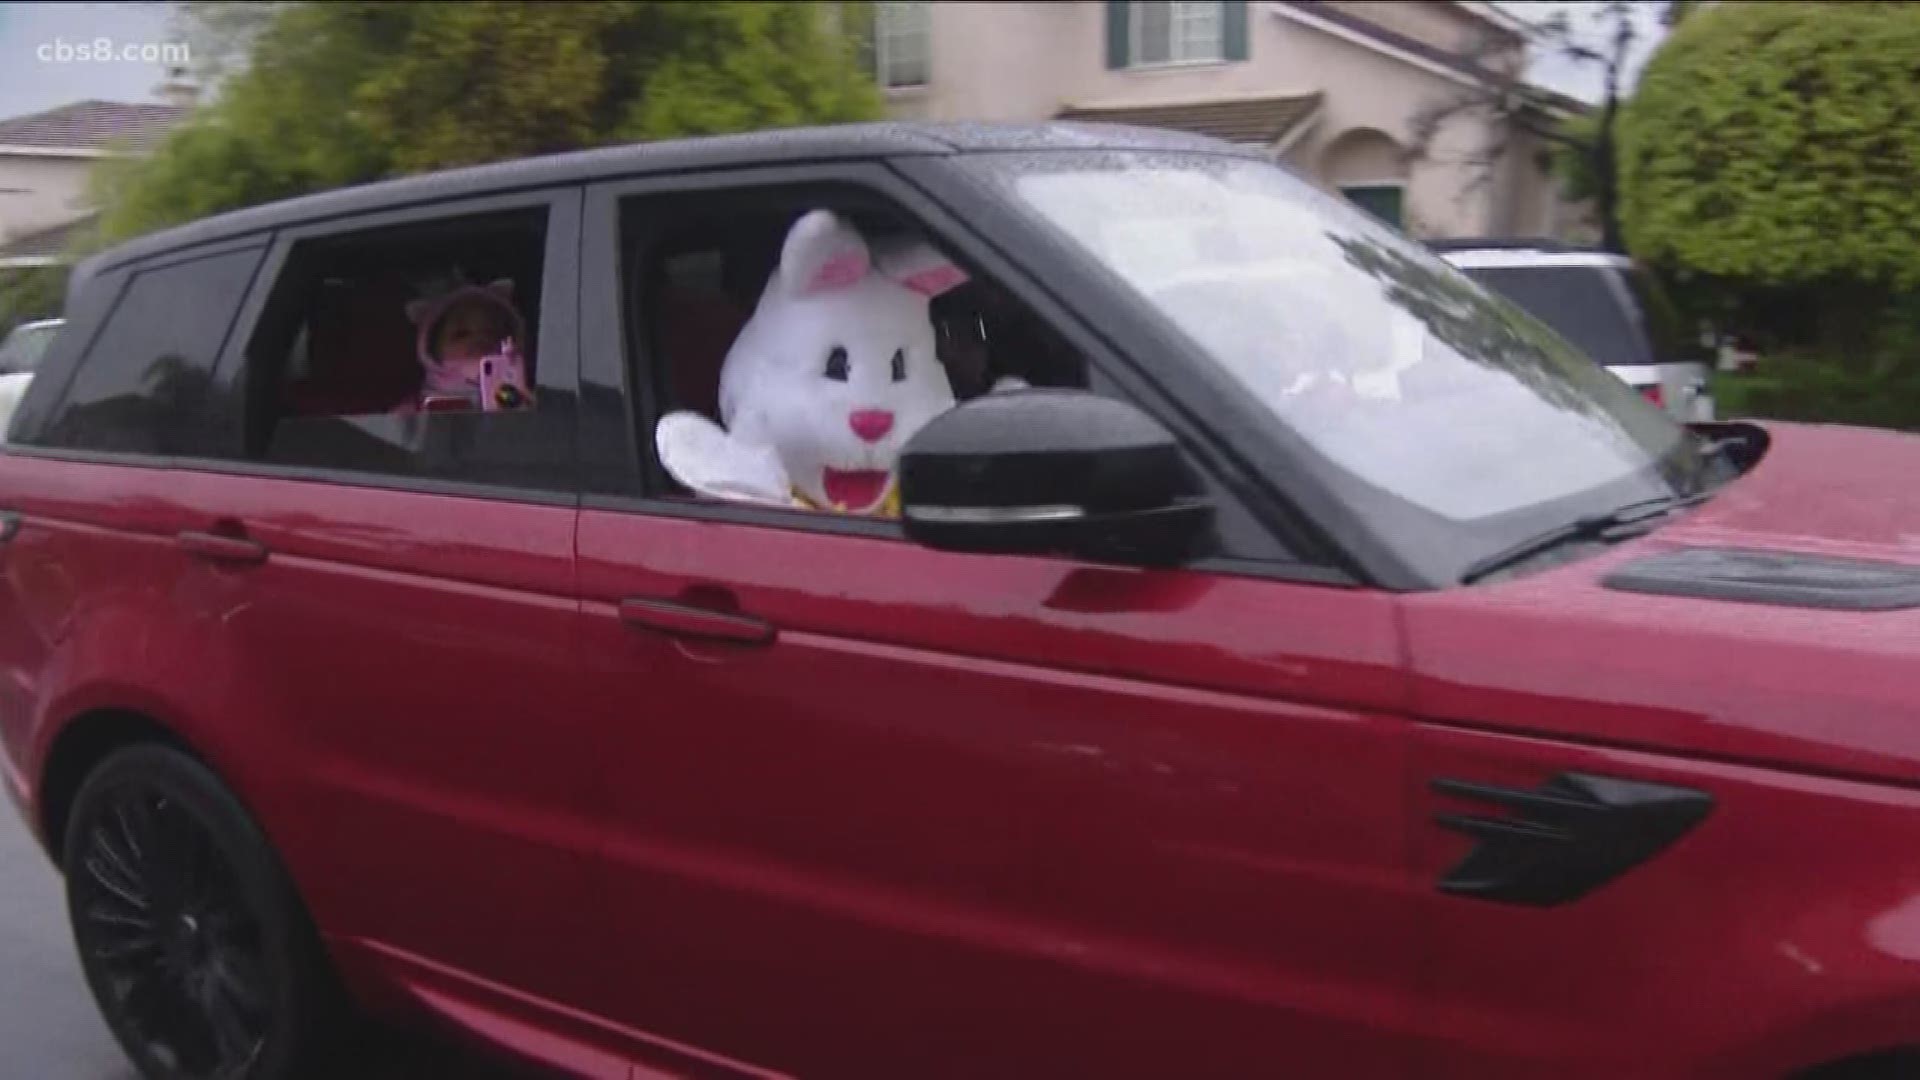 Children in the South Bay on Friday received a big surprised as the Easter Bunny hopped throughout the community on wheels.